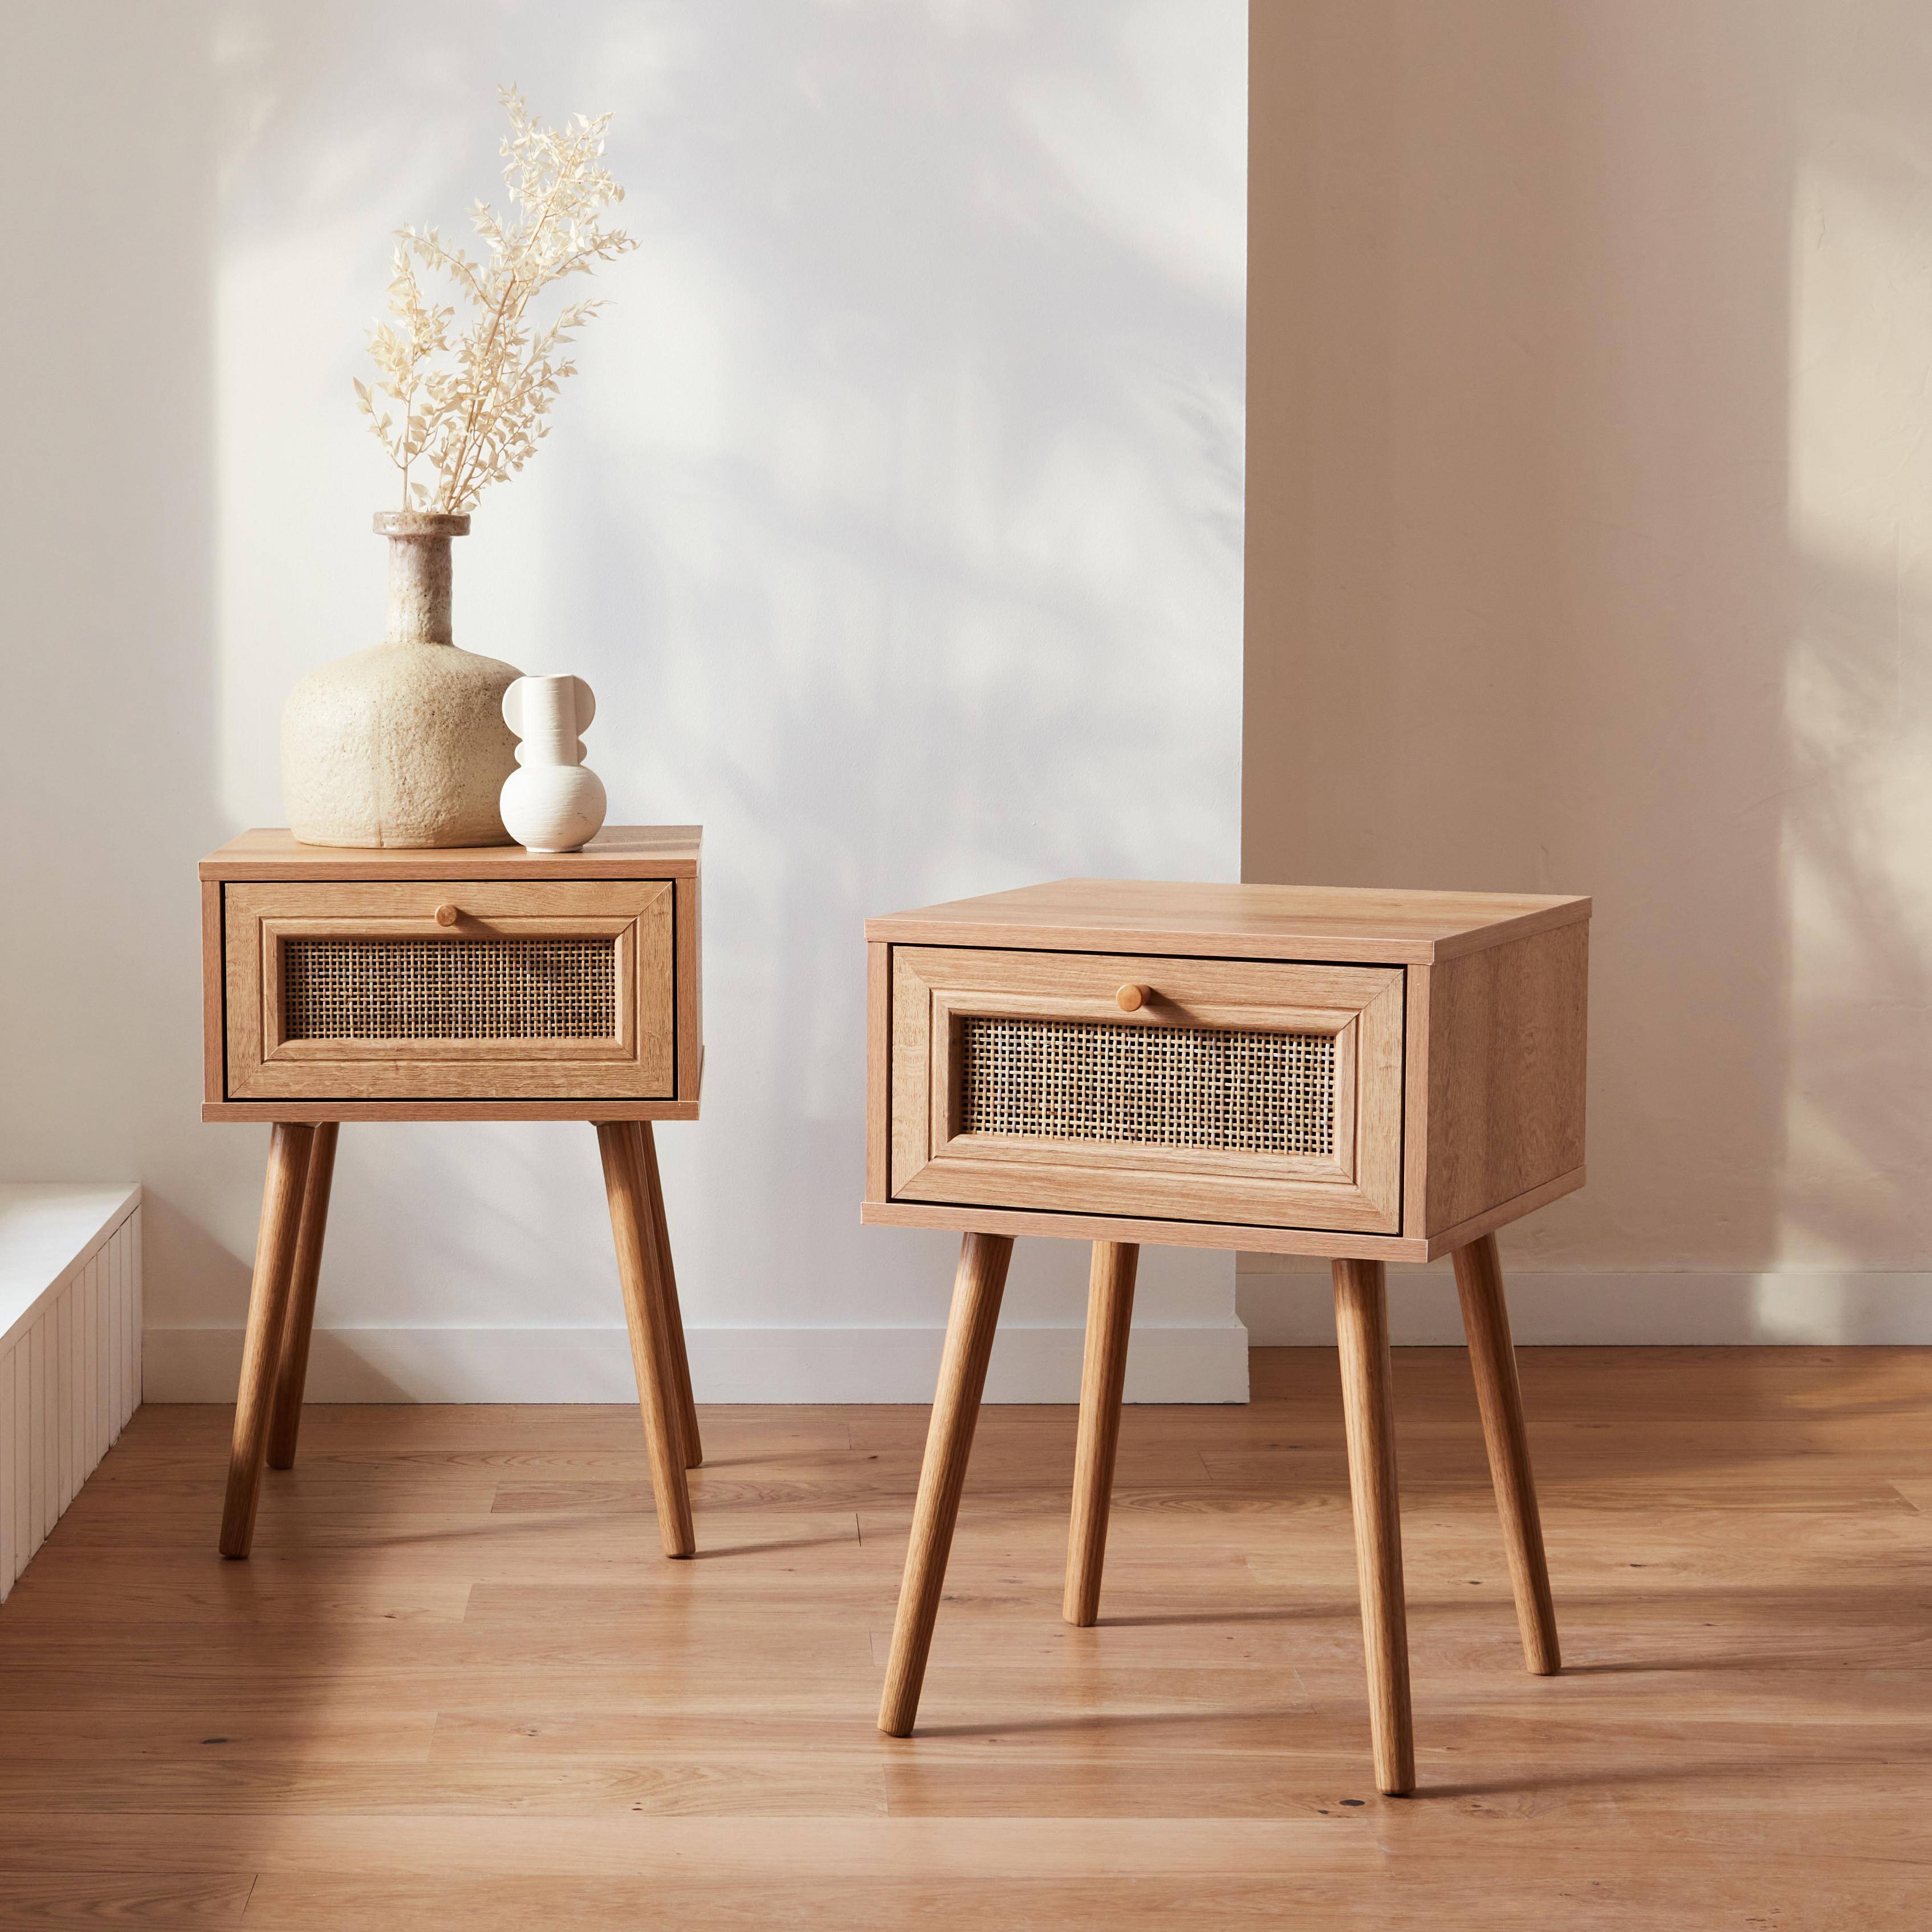 Pair of woven rattan bedside tables with drawer, 39x39x55.4cm - Boheme - Natural Wood colour,sweeek,Photo1